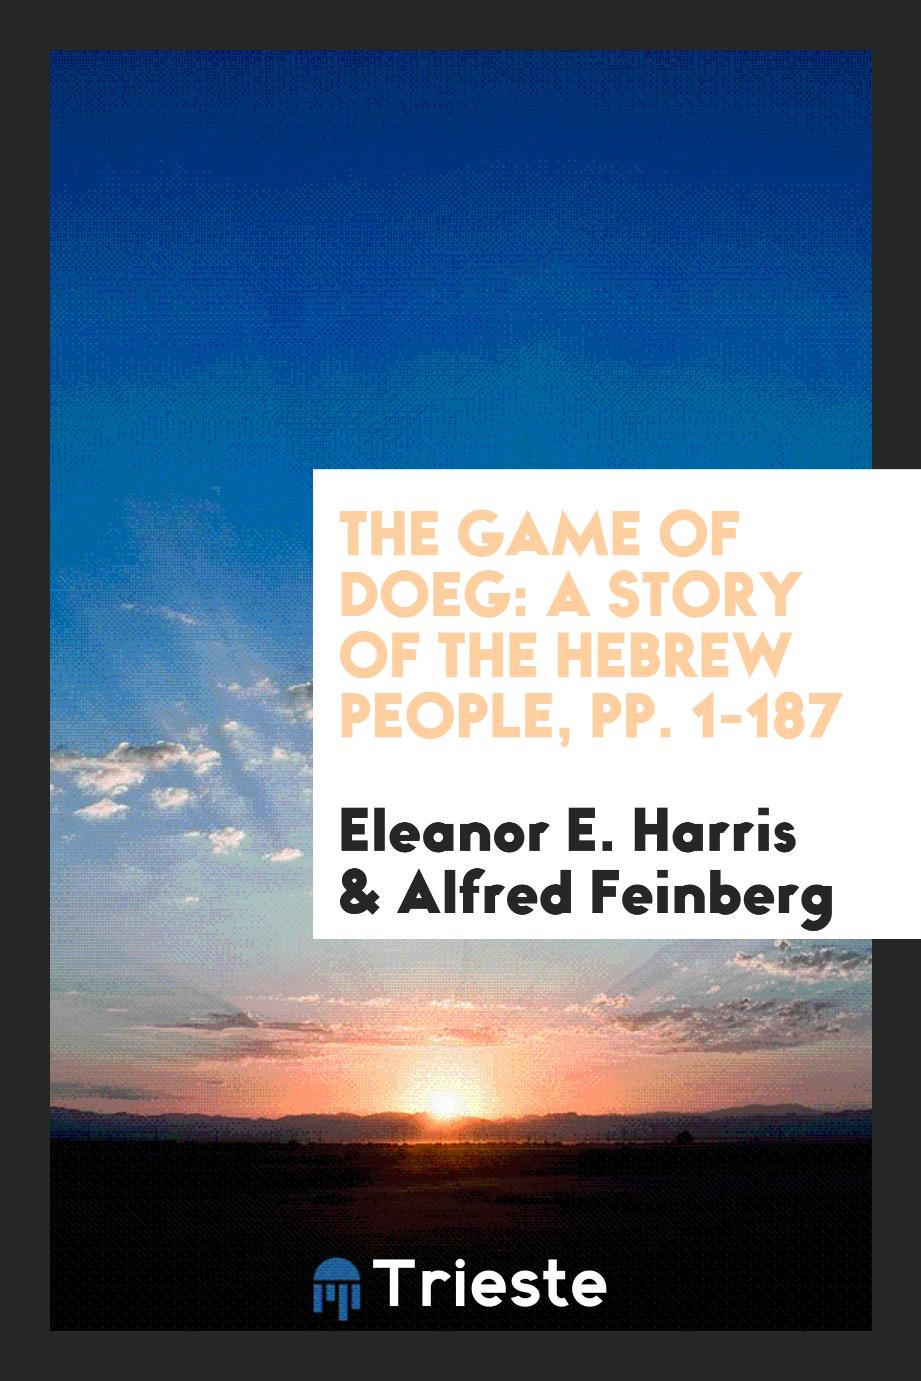 The Game of Doeg: A Story of the Hebrew People, pp. 1-187